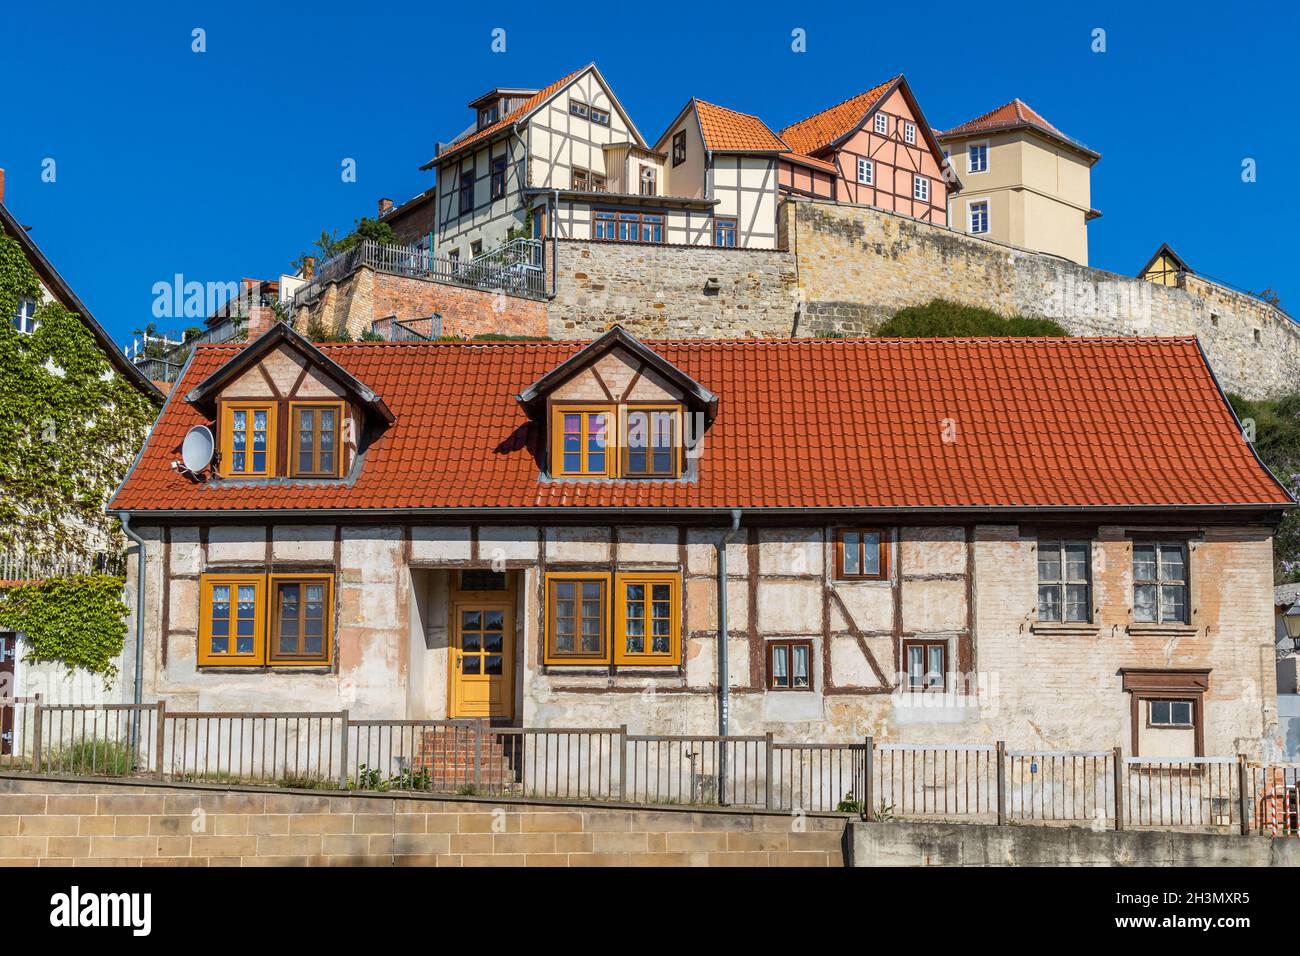 Pictures from the historical Quedlinburg MÃ¼nzenberg Stock Photo